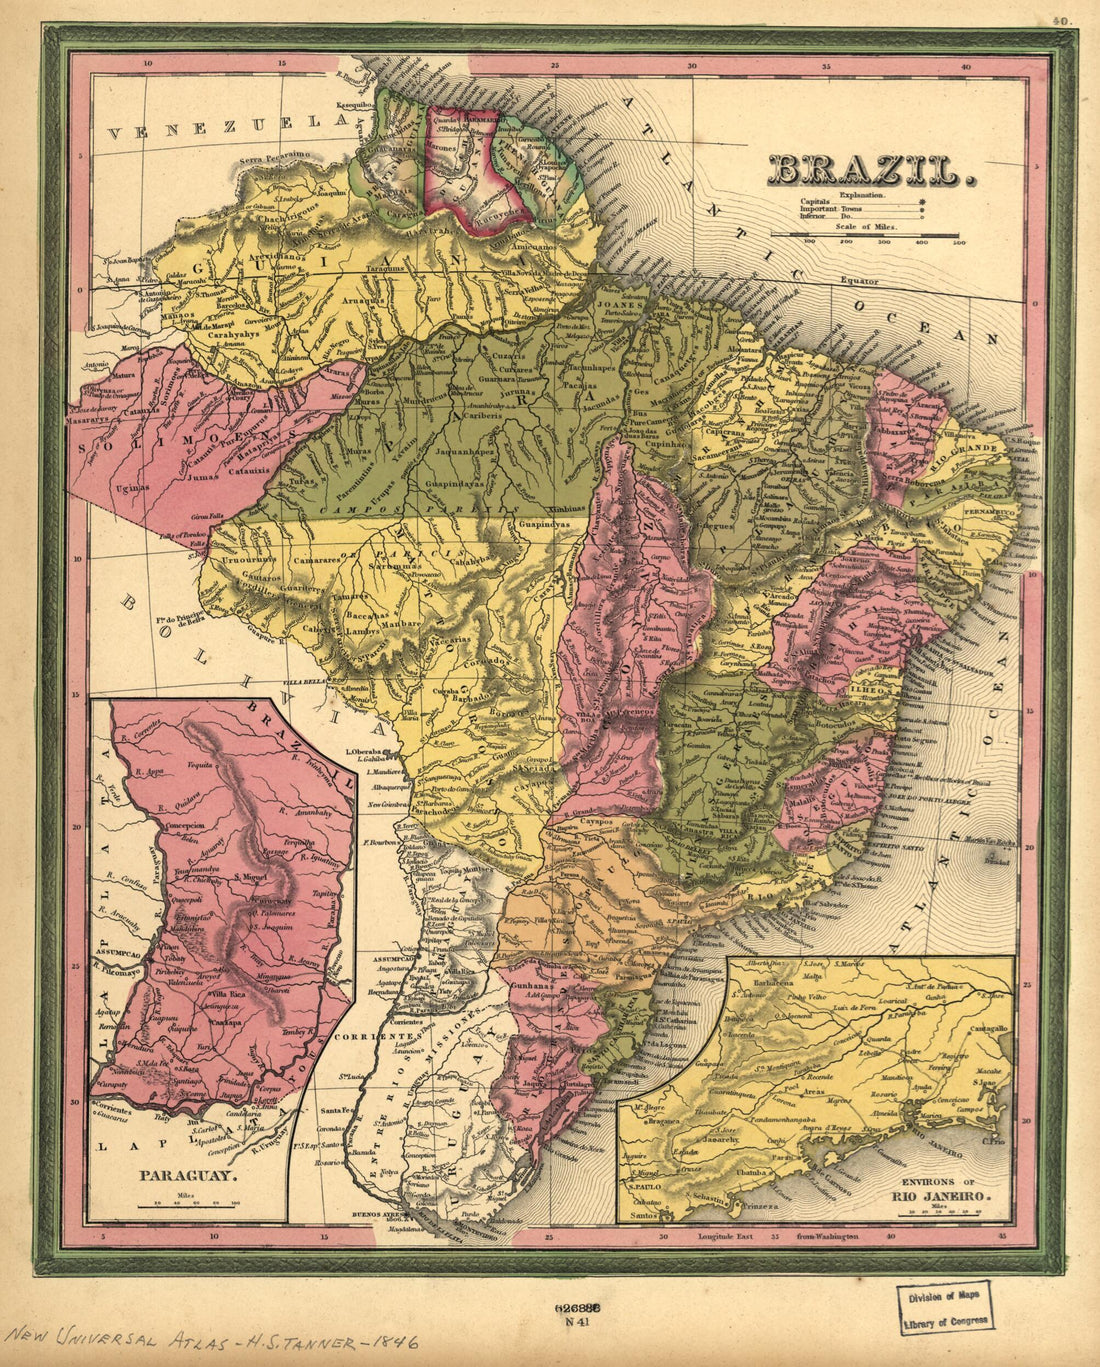 This old map of Brazil from 1846 was created by Henry Schenck Tanner in 1846